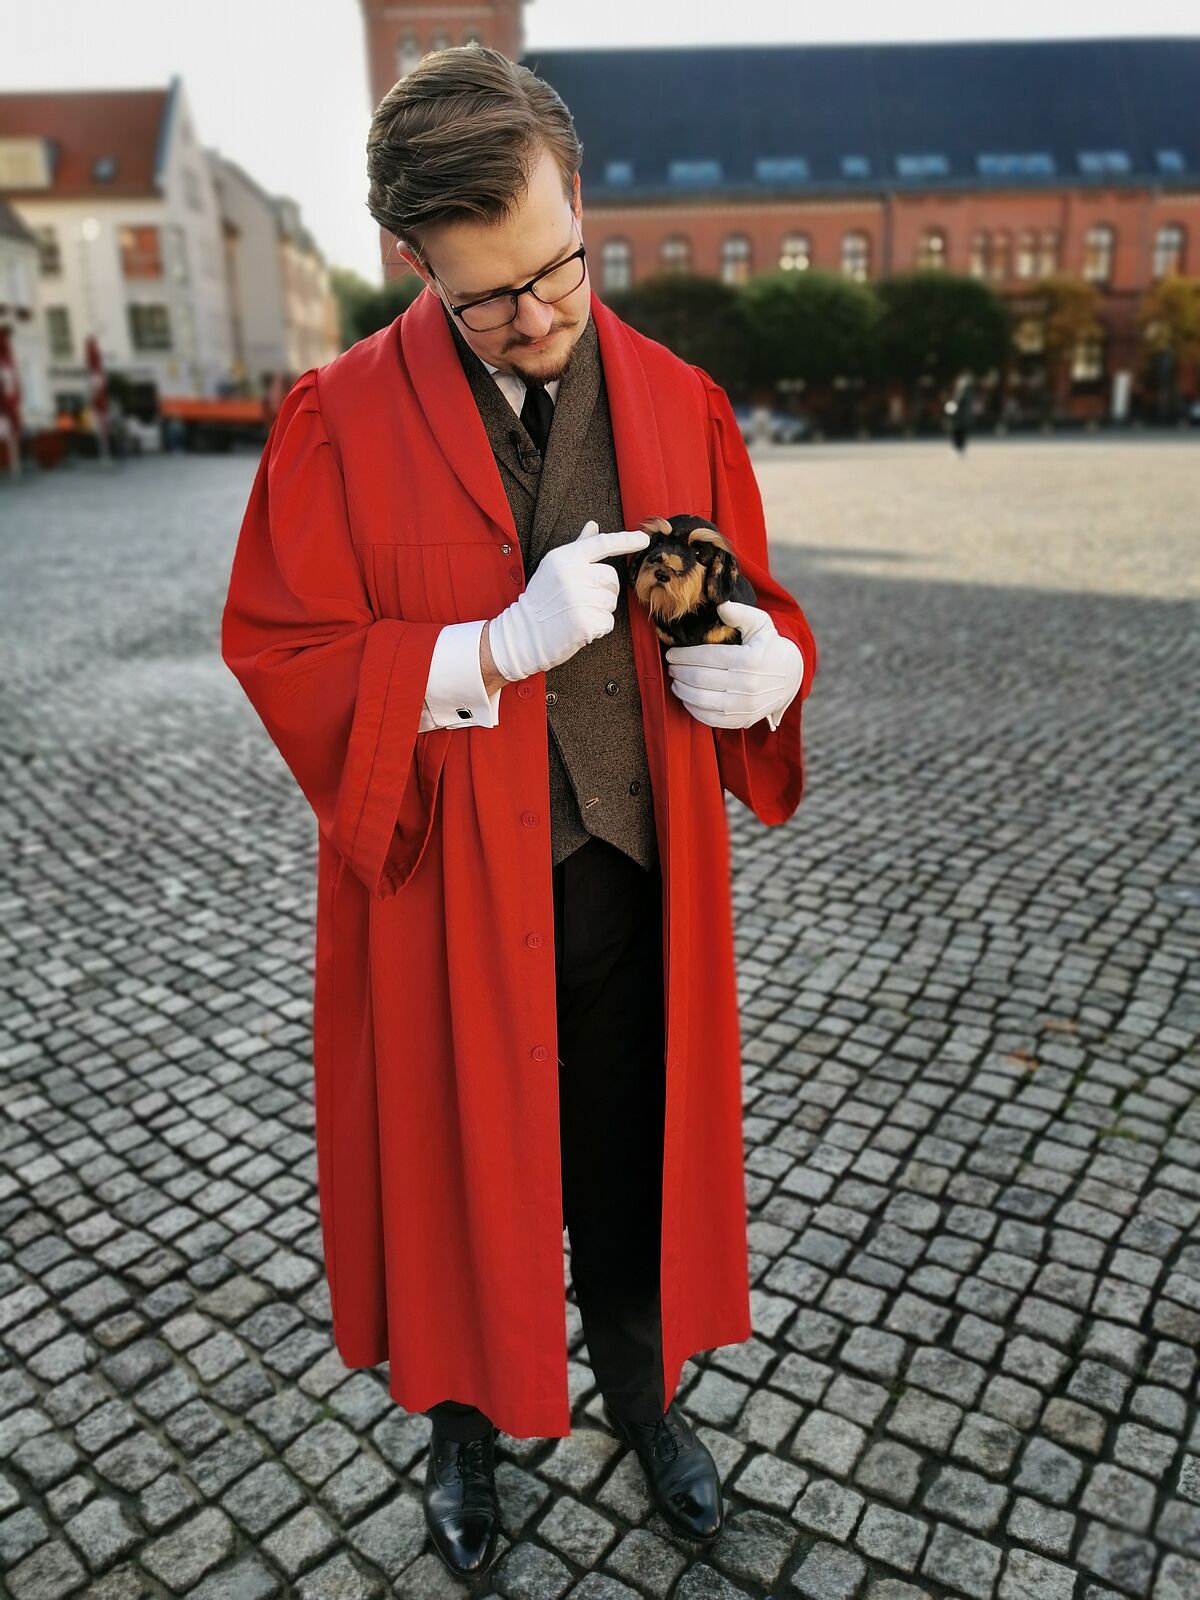 Tour guide Florian while filming "Stadt-Land-Uni"